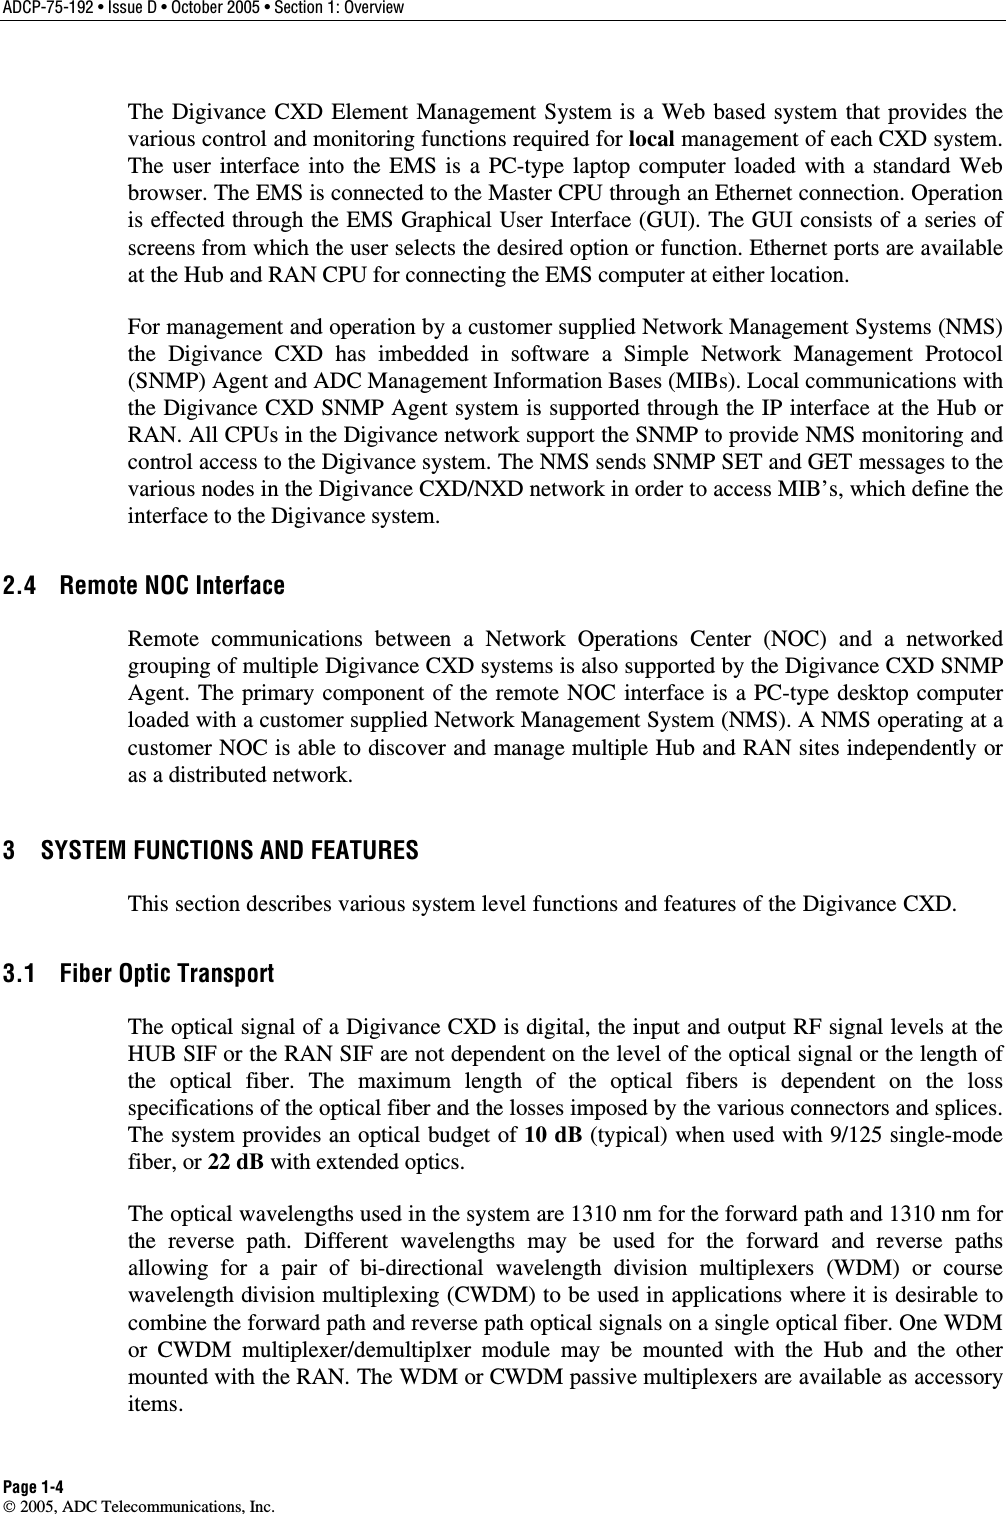 ADCP-75-192 • Issue D • October 2005 • Section 1: Overview Page 1-4  2005, ADC Telecommunications, Inc. The Digivance CXD Element Management System is a Web based system that provides the various control and monitoring functions required for local management of each CXD system. The user interface into the EMS is a PC-type laptop computer loaded with a standard Web browser. The EMS is connected to the Master CPU through an Ethernet connection. Operation is effected through the EMS Graphical User Interface (GUI). The GUI consists of a series of screens from which the user selects the desired option or function. Ethernet ports are available at the Hub and RAN CPU for connecting the EMS computer at either location.  For management and operation by a customer supplied Network Management Systems (NMS) the Digivance CXD has imbedded in software a Simple Network Management Protocol (SNMP) Agent and ADC Management Information Bases (MIBs). Local communications with the Digivance CXD SNMP Agent system is supported through the IP interface at the Hub or RAN. All CPUs in the Digivance network support the SNMP to provide NMS monitoring and control access to the Digivance system. The NMS sends SNMP SET and GET messages to the various nodes in the Digivance CXD/NXD network in order to access MIB’s, which define the interface to the Digivance system.  2.4  Remote NOC Interface Remote communications between a Network Operations Center (NOC) and a networked grouping of multiple Digivance CXD systems is also supported by the Digivance CXD SNMP Agent. The primary component of the remote NOC interface is a PC-type desktop computer loaded with a customer supplied Network Management System (NMS). A NMS operating at a customer NOC is able to discover and manage multiple Hub and RAN sites independently or as a distributed network.  3  SYSTEM FUNCTIONS AND FEATURES This section describes various system level functions and features of the Digivance CXD.  3.1  Fiber Optic Transport The optical signal of a Digivance CXD is digital, the input and output RF signal levels at the HUB SIF or the RAN SIF are not dependent on the level of the optical signal or the length of the optical fiber. The maximum length of the optical fibers is dependent on the loss specifications of the optical fiber and the losses imposed by the various connectors and splices. The system provides an optical budget of 10 dB (typical) when used with 9/125 single-mode fiber, or 22 dB with extended optics.  The optical wavelengths used in the system are 1310 nm for the forward path and 1310 nm for the reverse path. Different wavelengths may be used for the forward and reverse paths allowing for a pair of bi-directional wavelength division multiplexers (WDM) or course wavelength division multiplexing (CWDM) to be used in applications where it is desirable to combine the forward path and reverse path optical signals on a single optical fiber. One WDM or CWDM multiplexer/demultiplxer module may be mounted with the Hub and the other mounted with the RAN. The WDM or CWDM passive multiplexers are available as accessory items.  